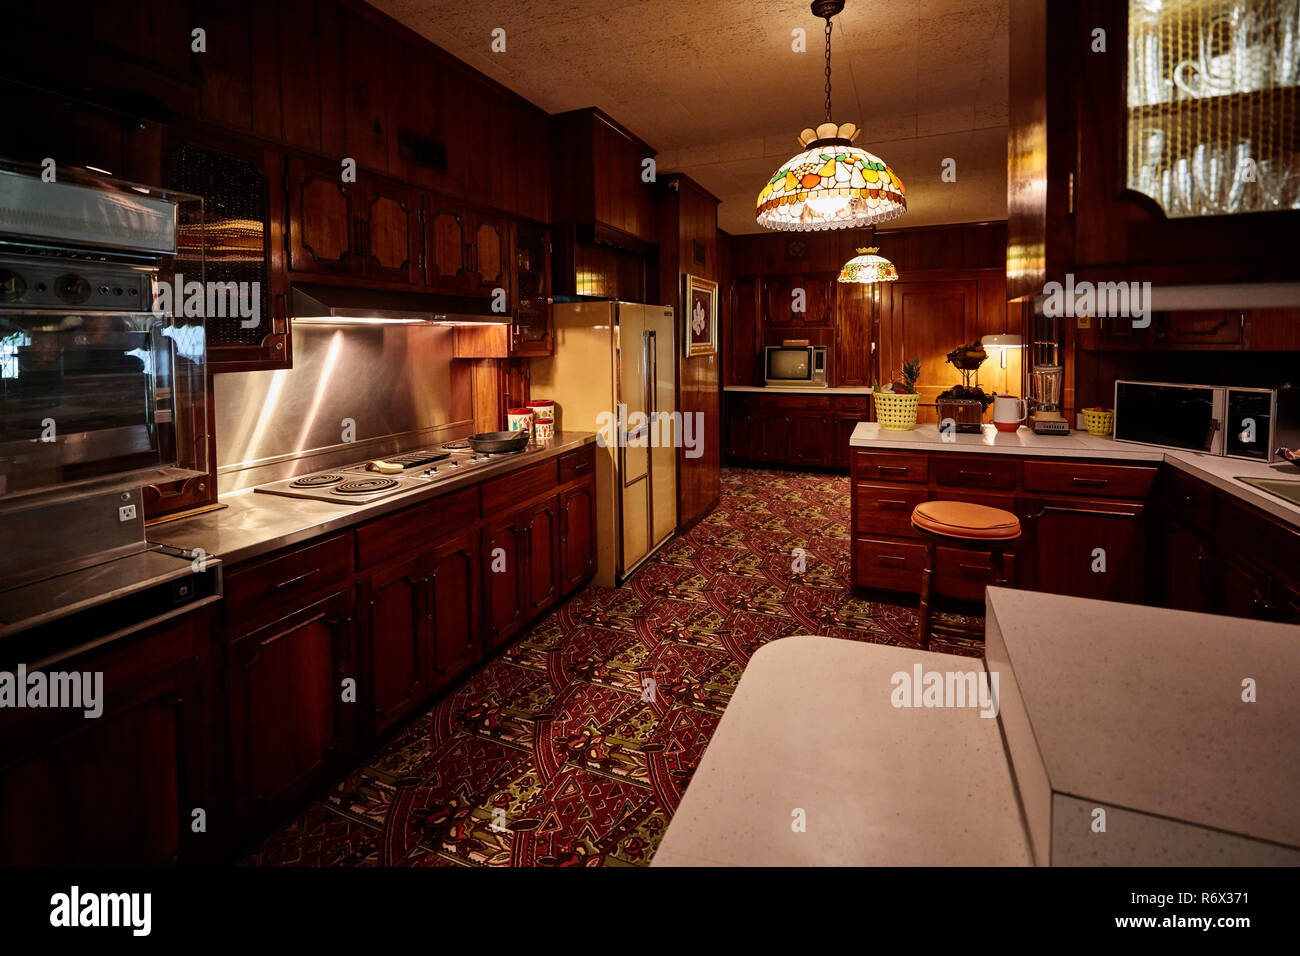 Kitchen of Elvis Presley's home at Graceland in Memphis, Tennessee Stock Photo